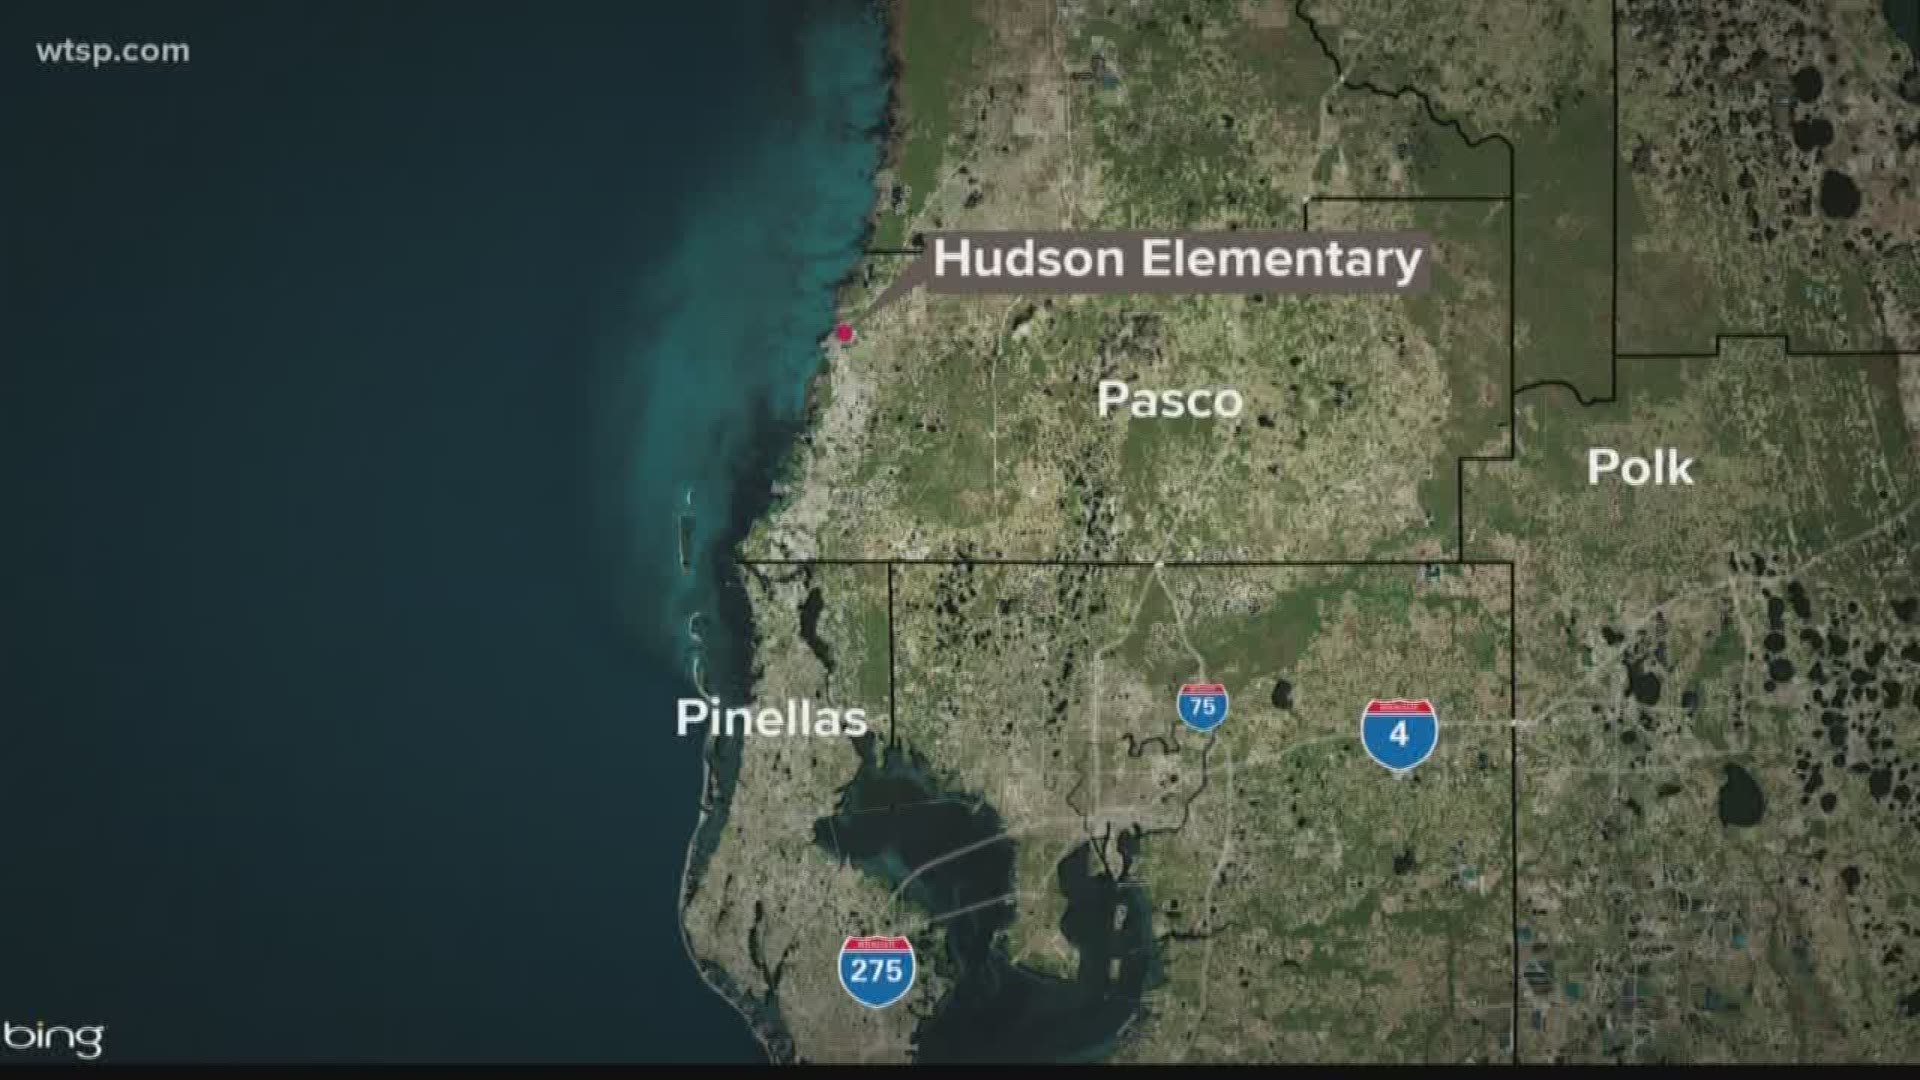 Pasco County sheriff's deputies are investigating after the child brought the firearm to Hudson Elementary School. https://bit.ly/2MNtm4t